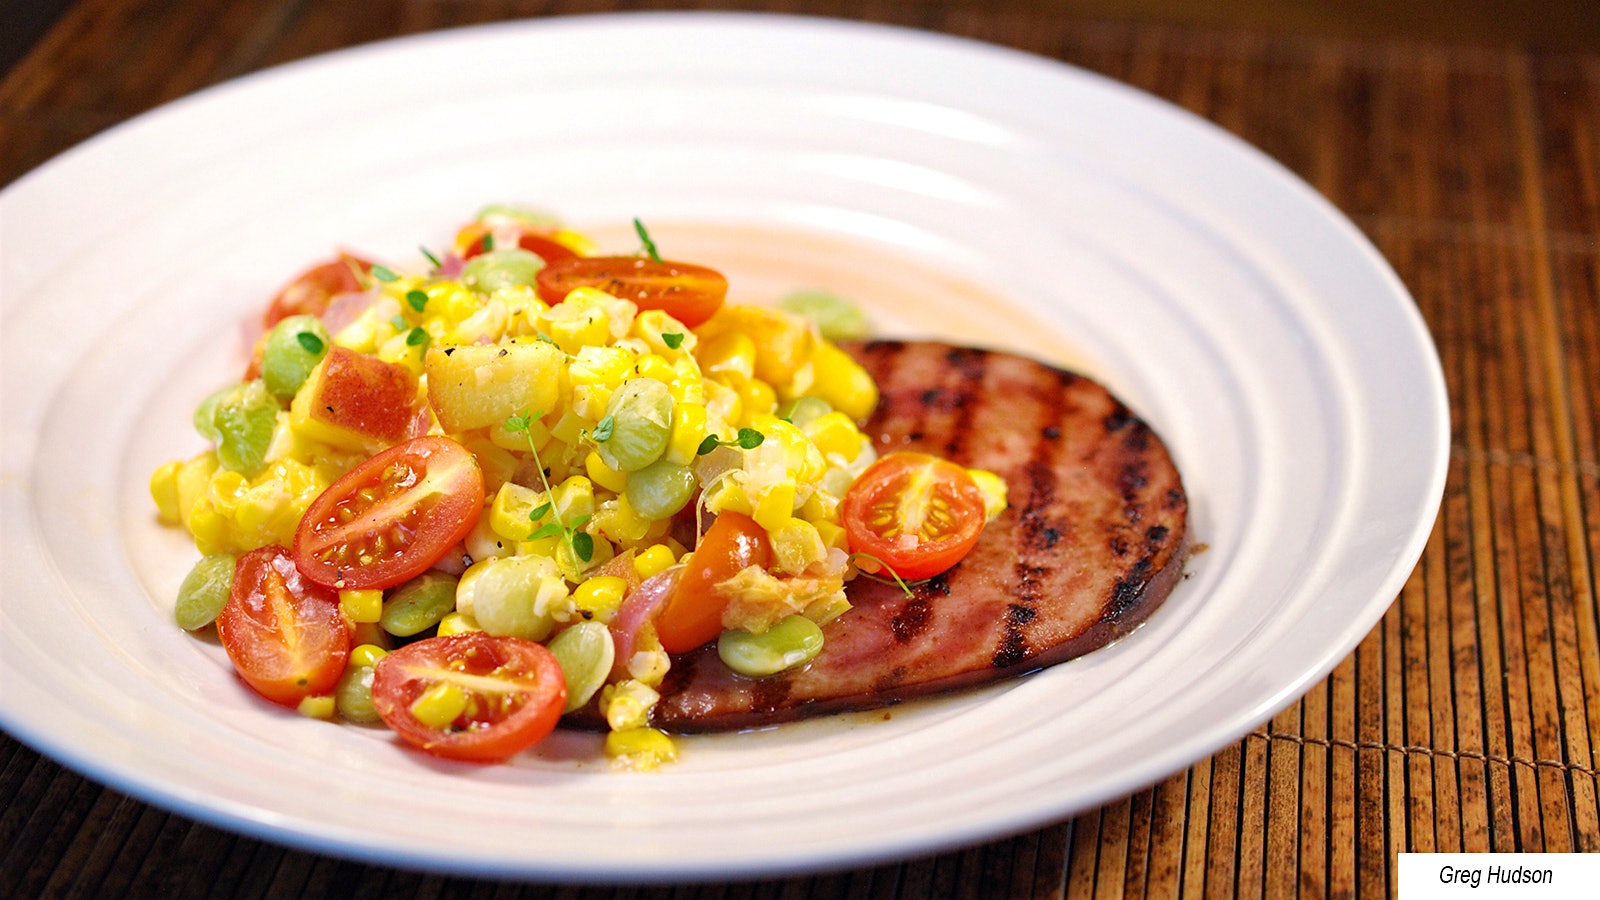  A plate containing a ham steak topped with a succotash made with corn, lima beans, tomatoes and peaches.